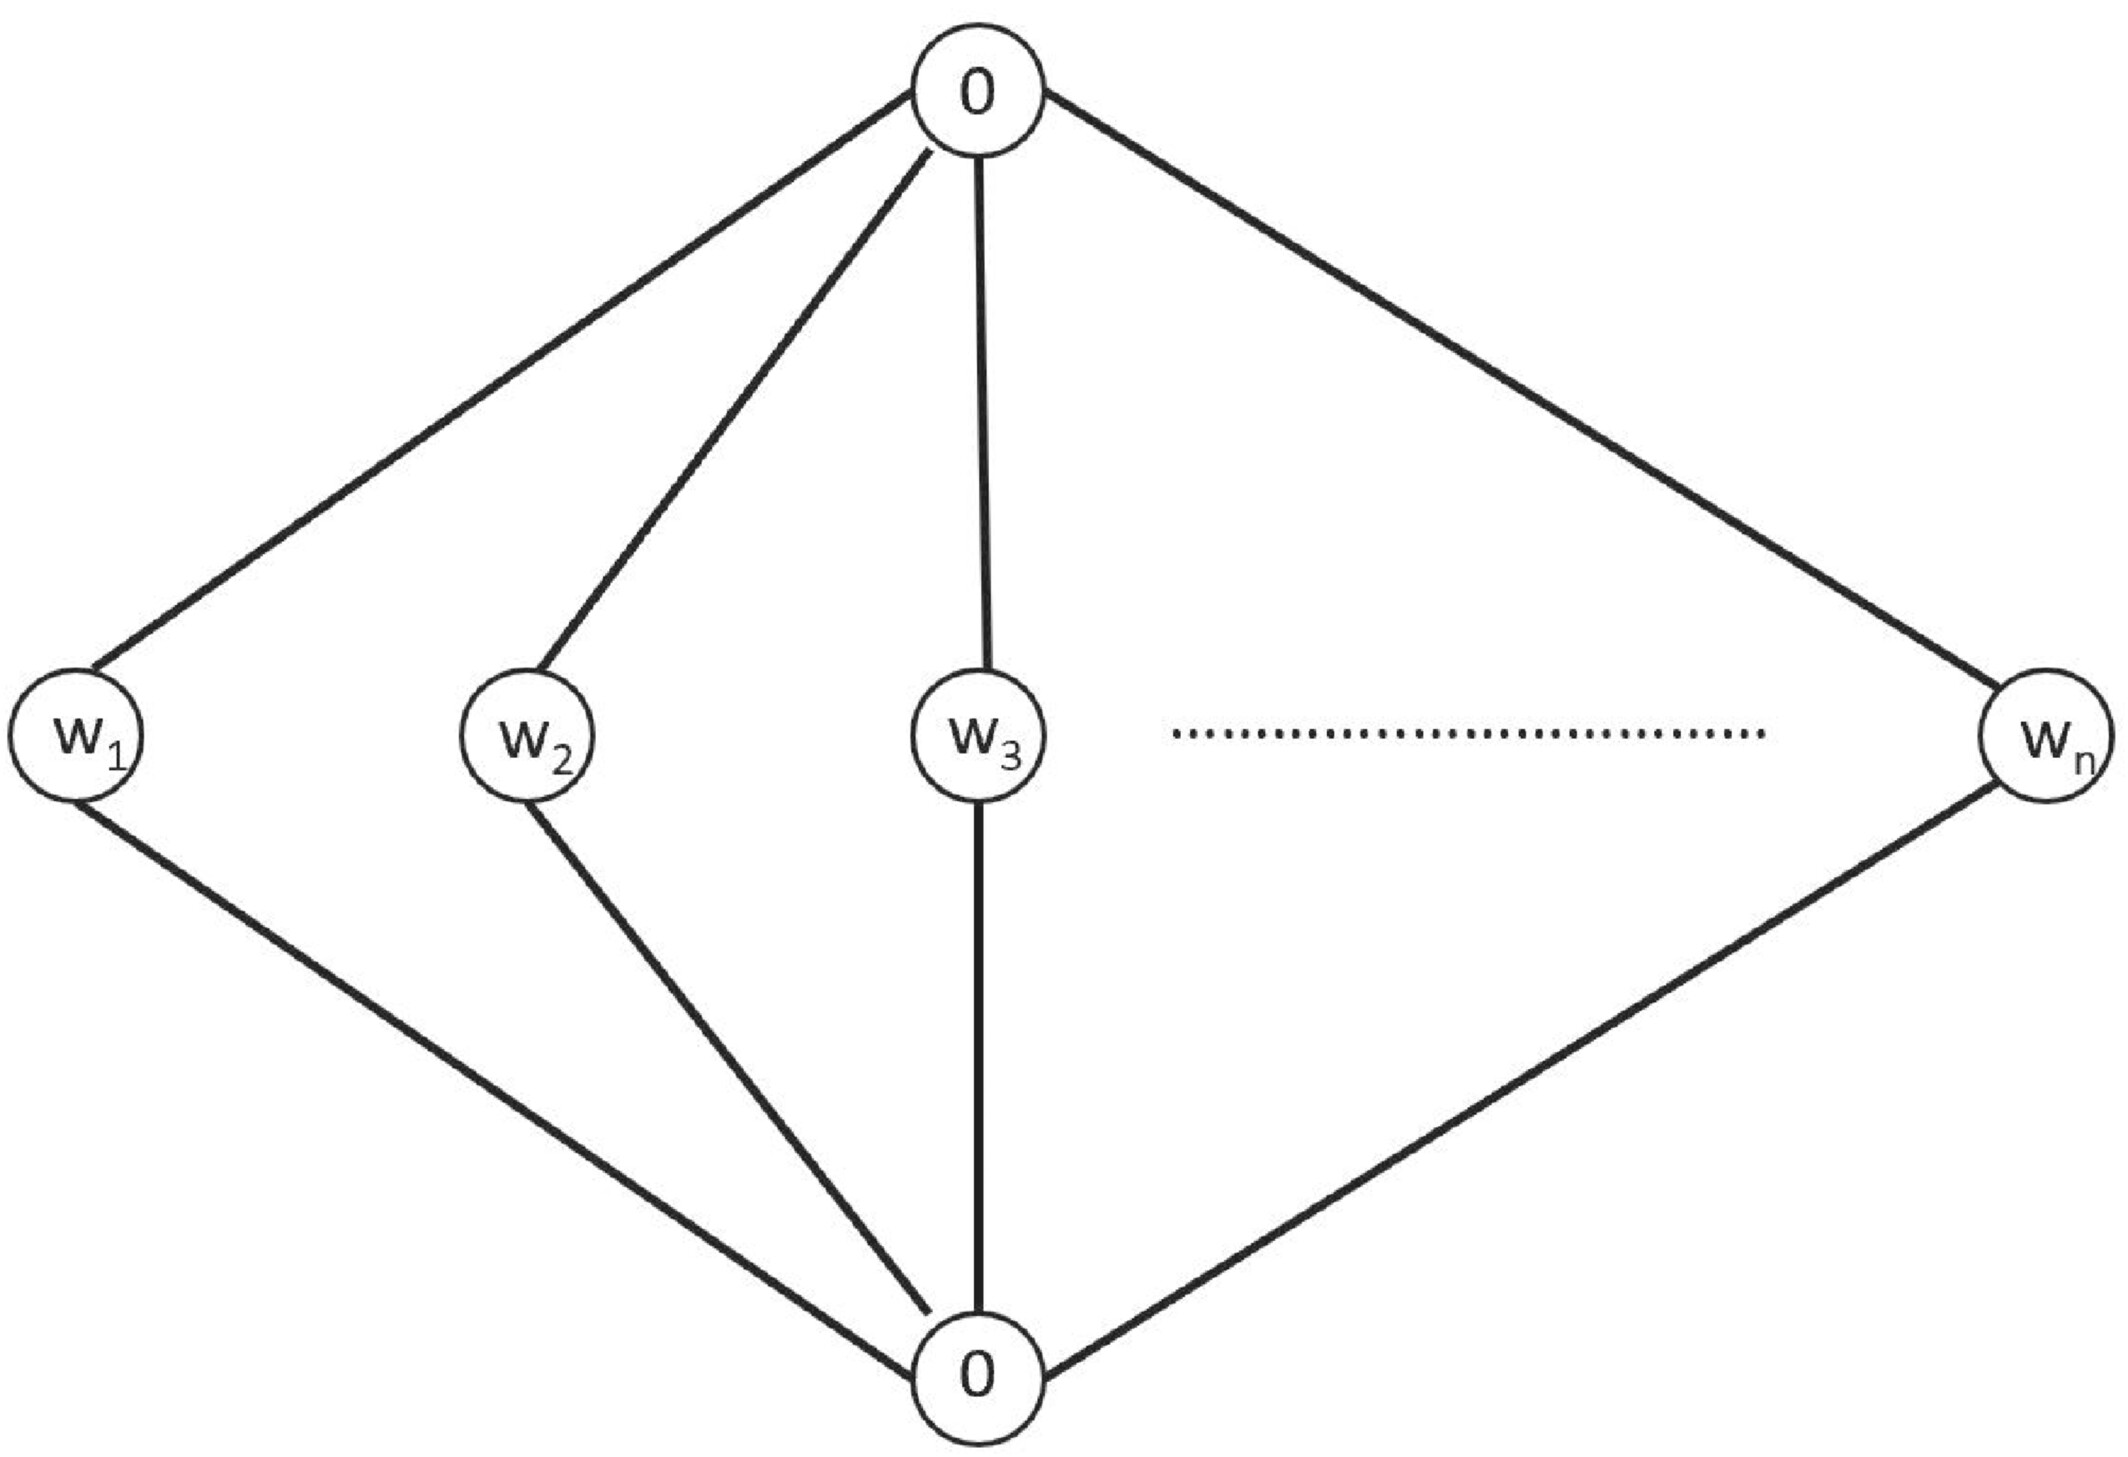 Connected Graph Partitioning with Aggregated and Non-aggregated Gap Objective Functions 